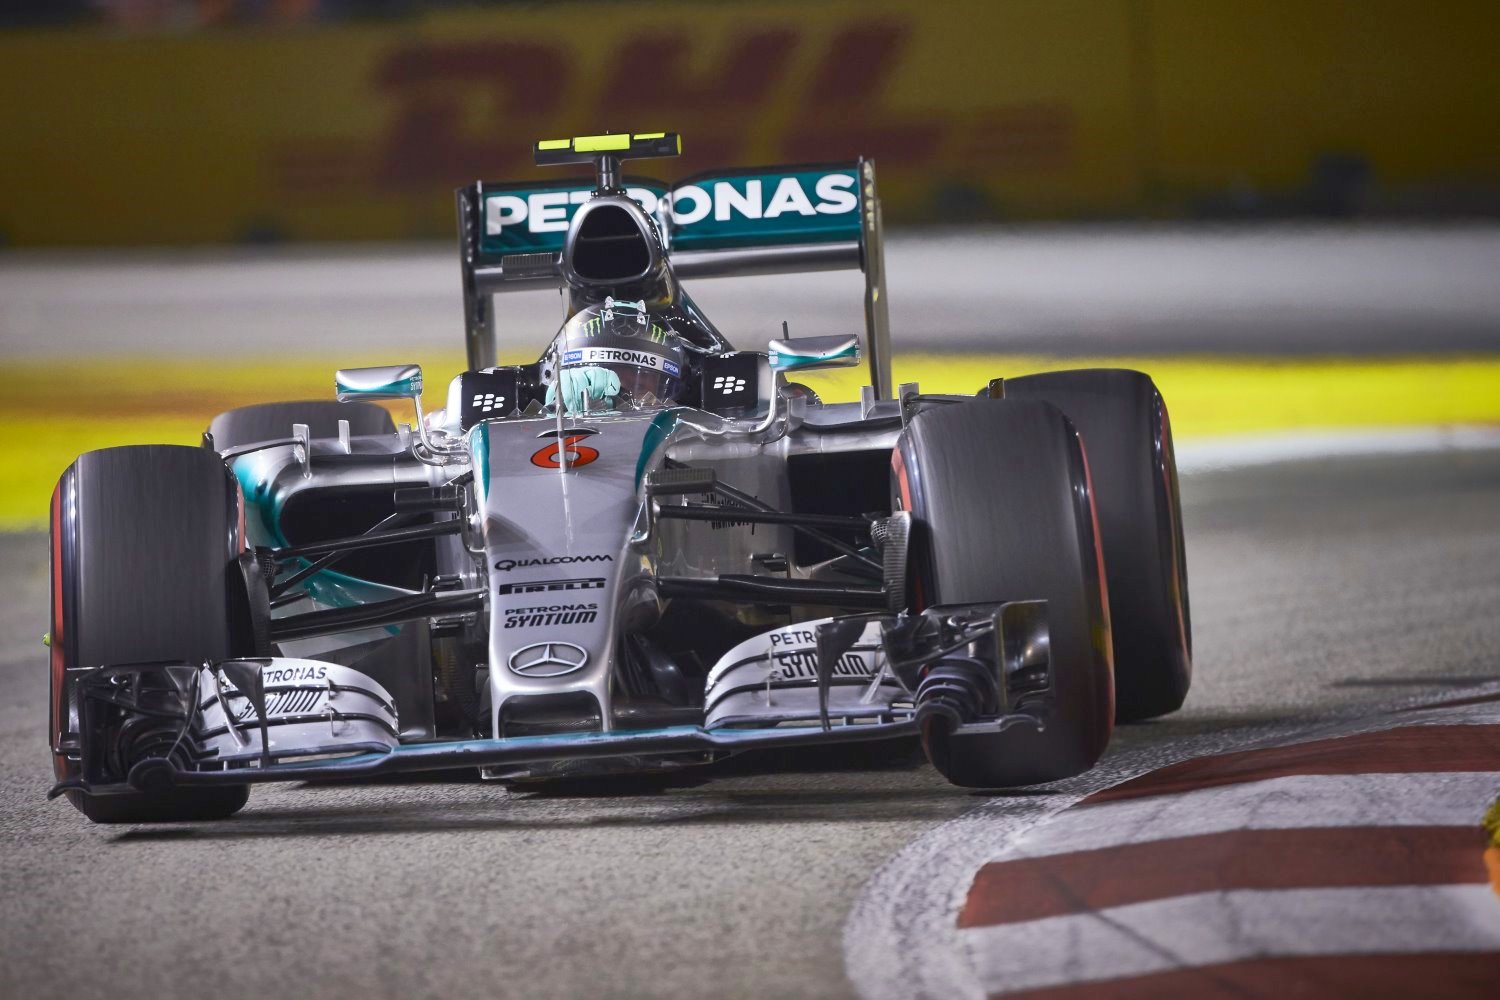 The only reason why Mercedes got beat in Singapore is because their 100 HP advantage was negated on the tight streets of Singapore